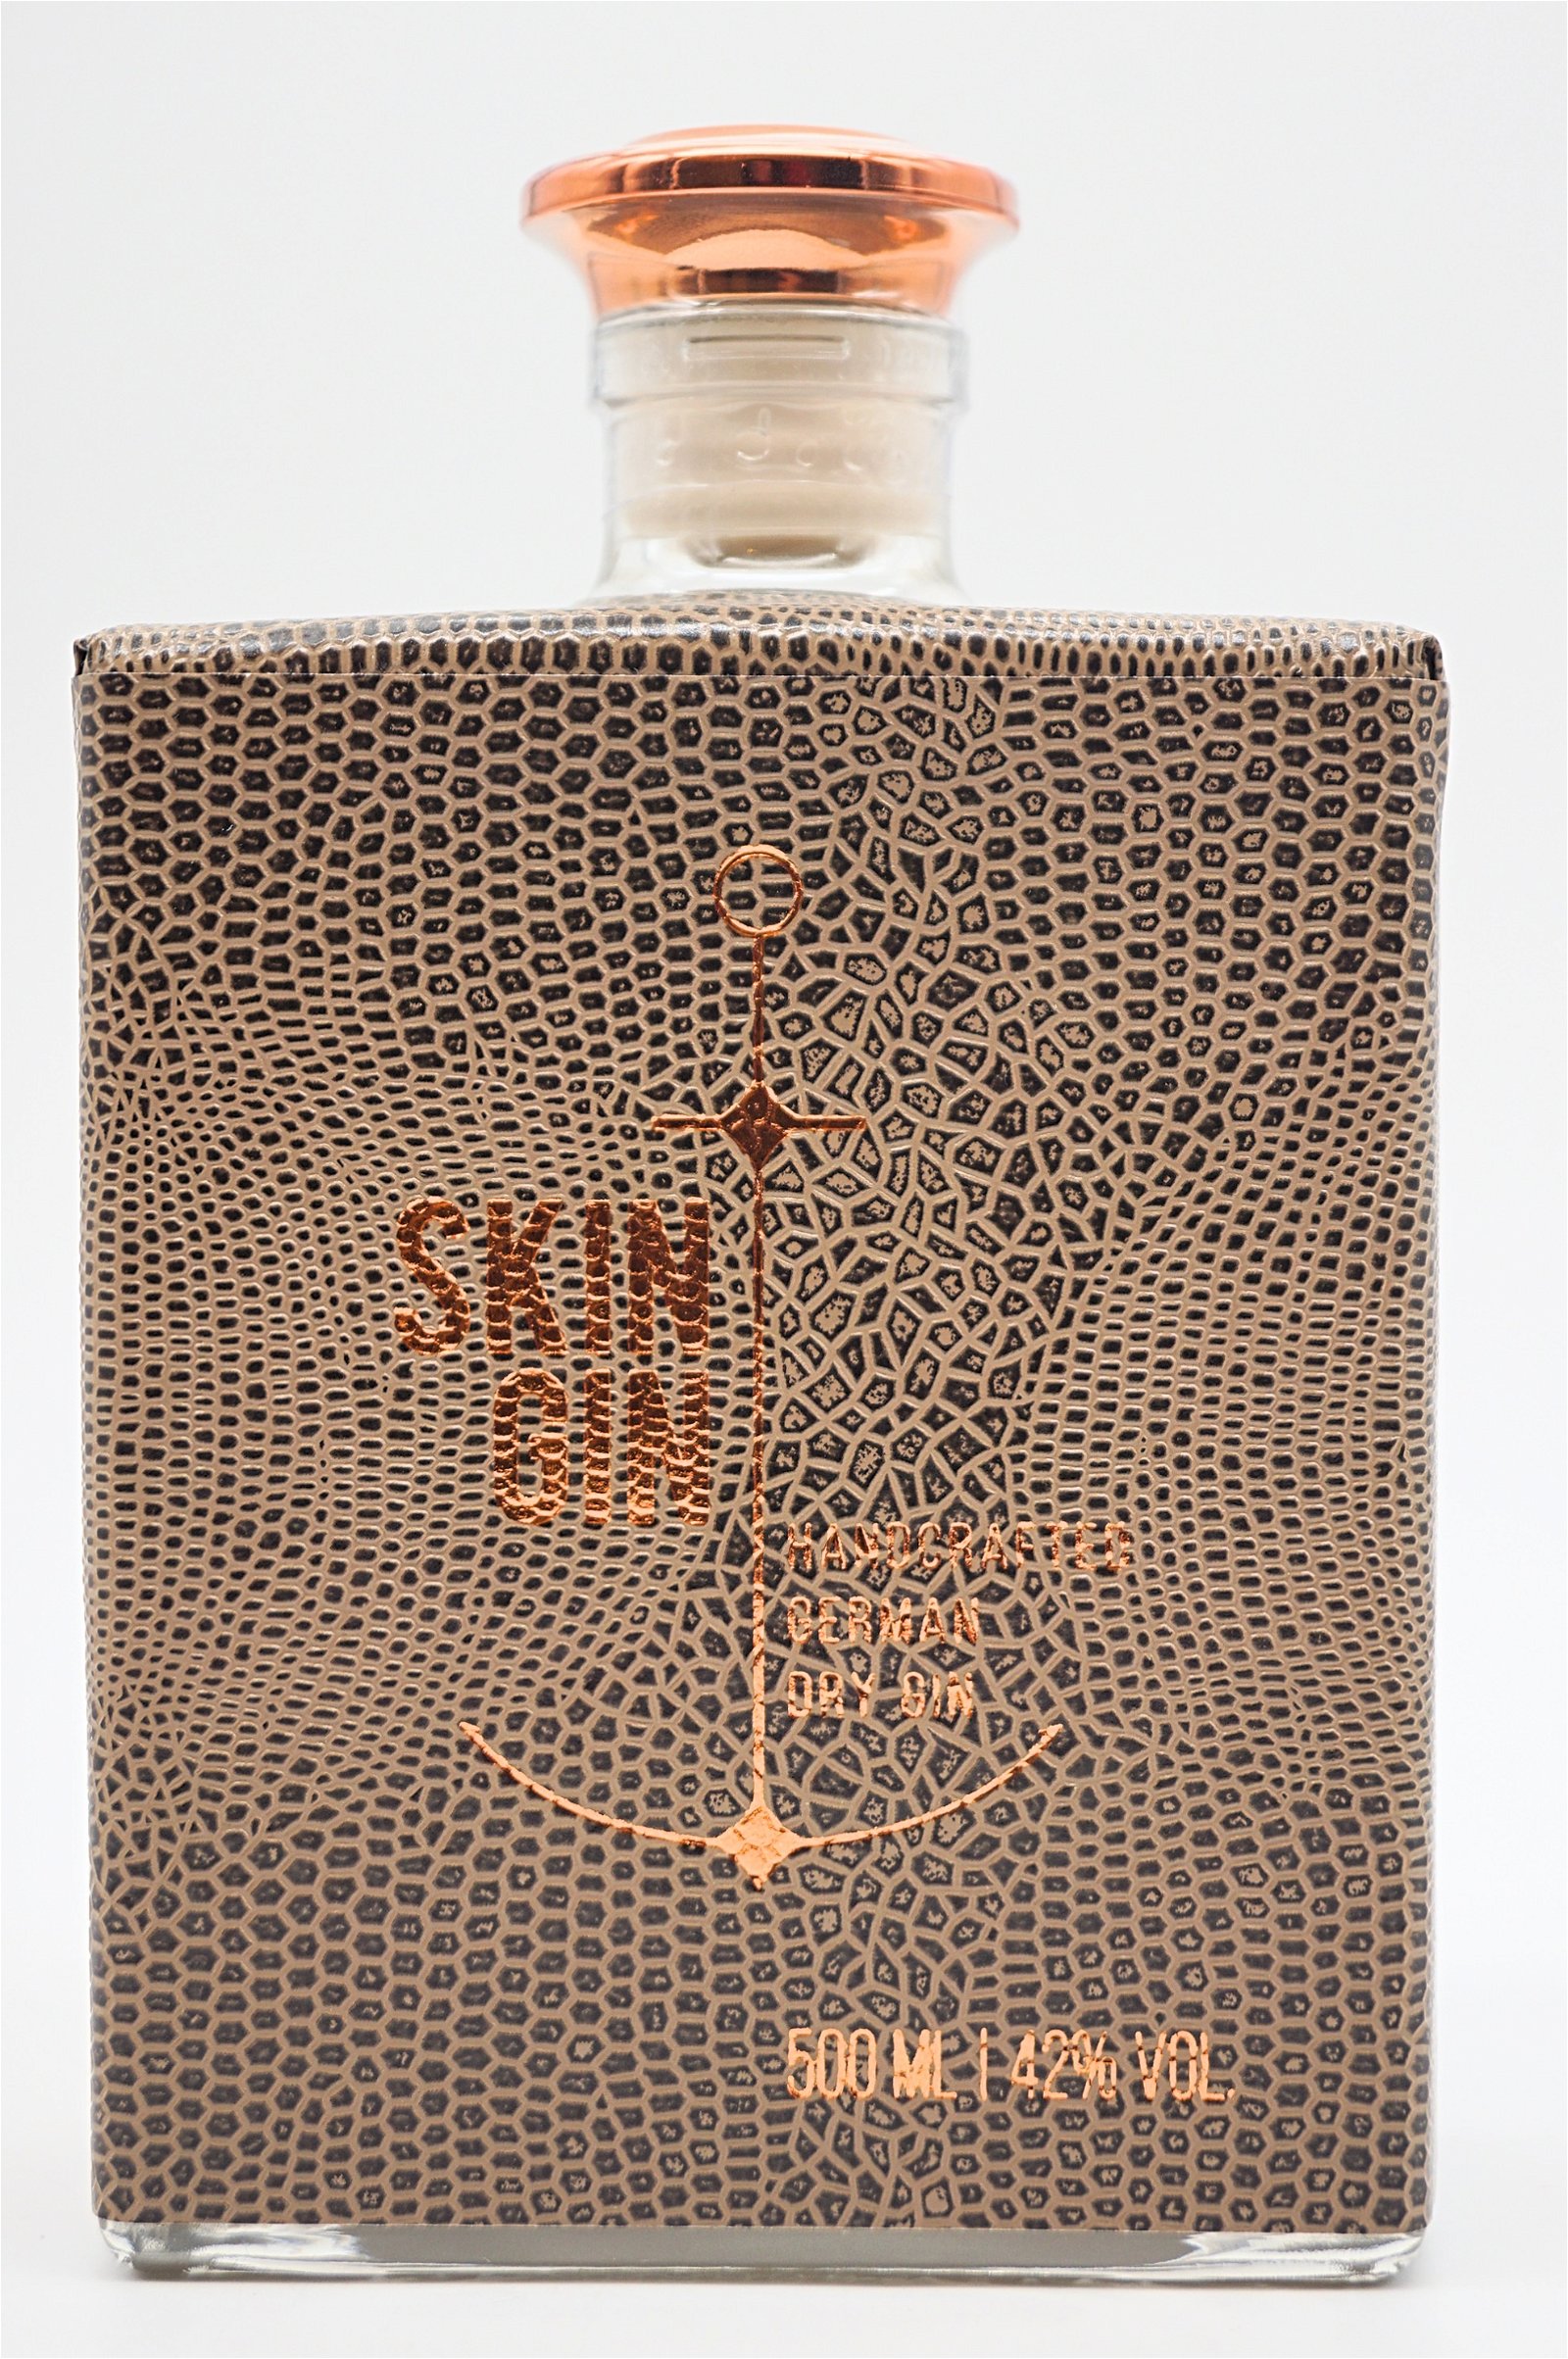 Skin Gin Reptile Brown Handcrafted German Dry Gin